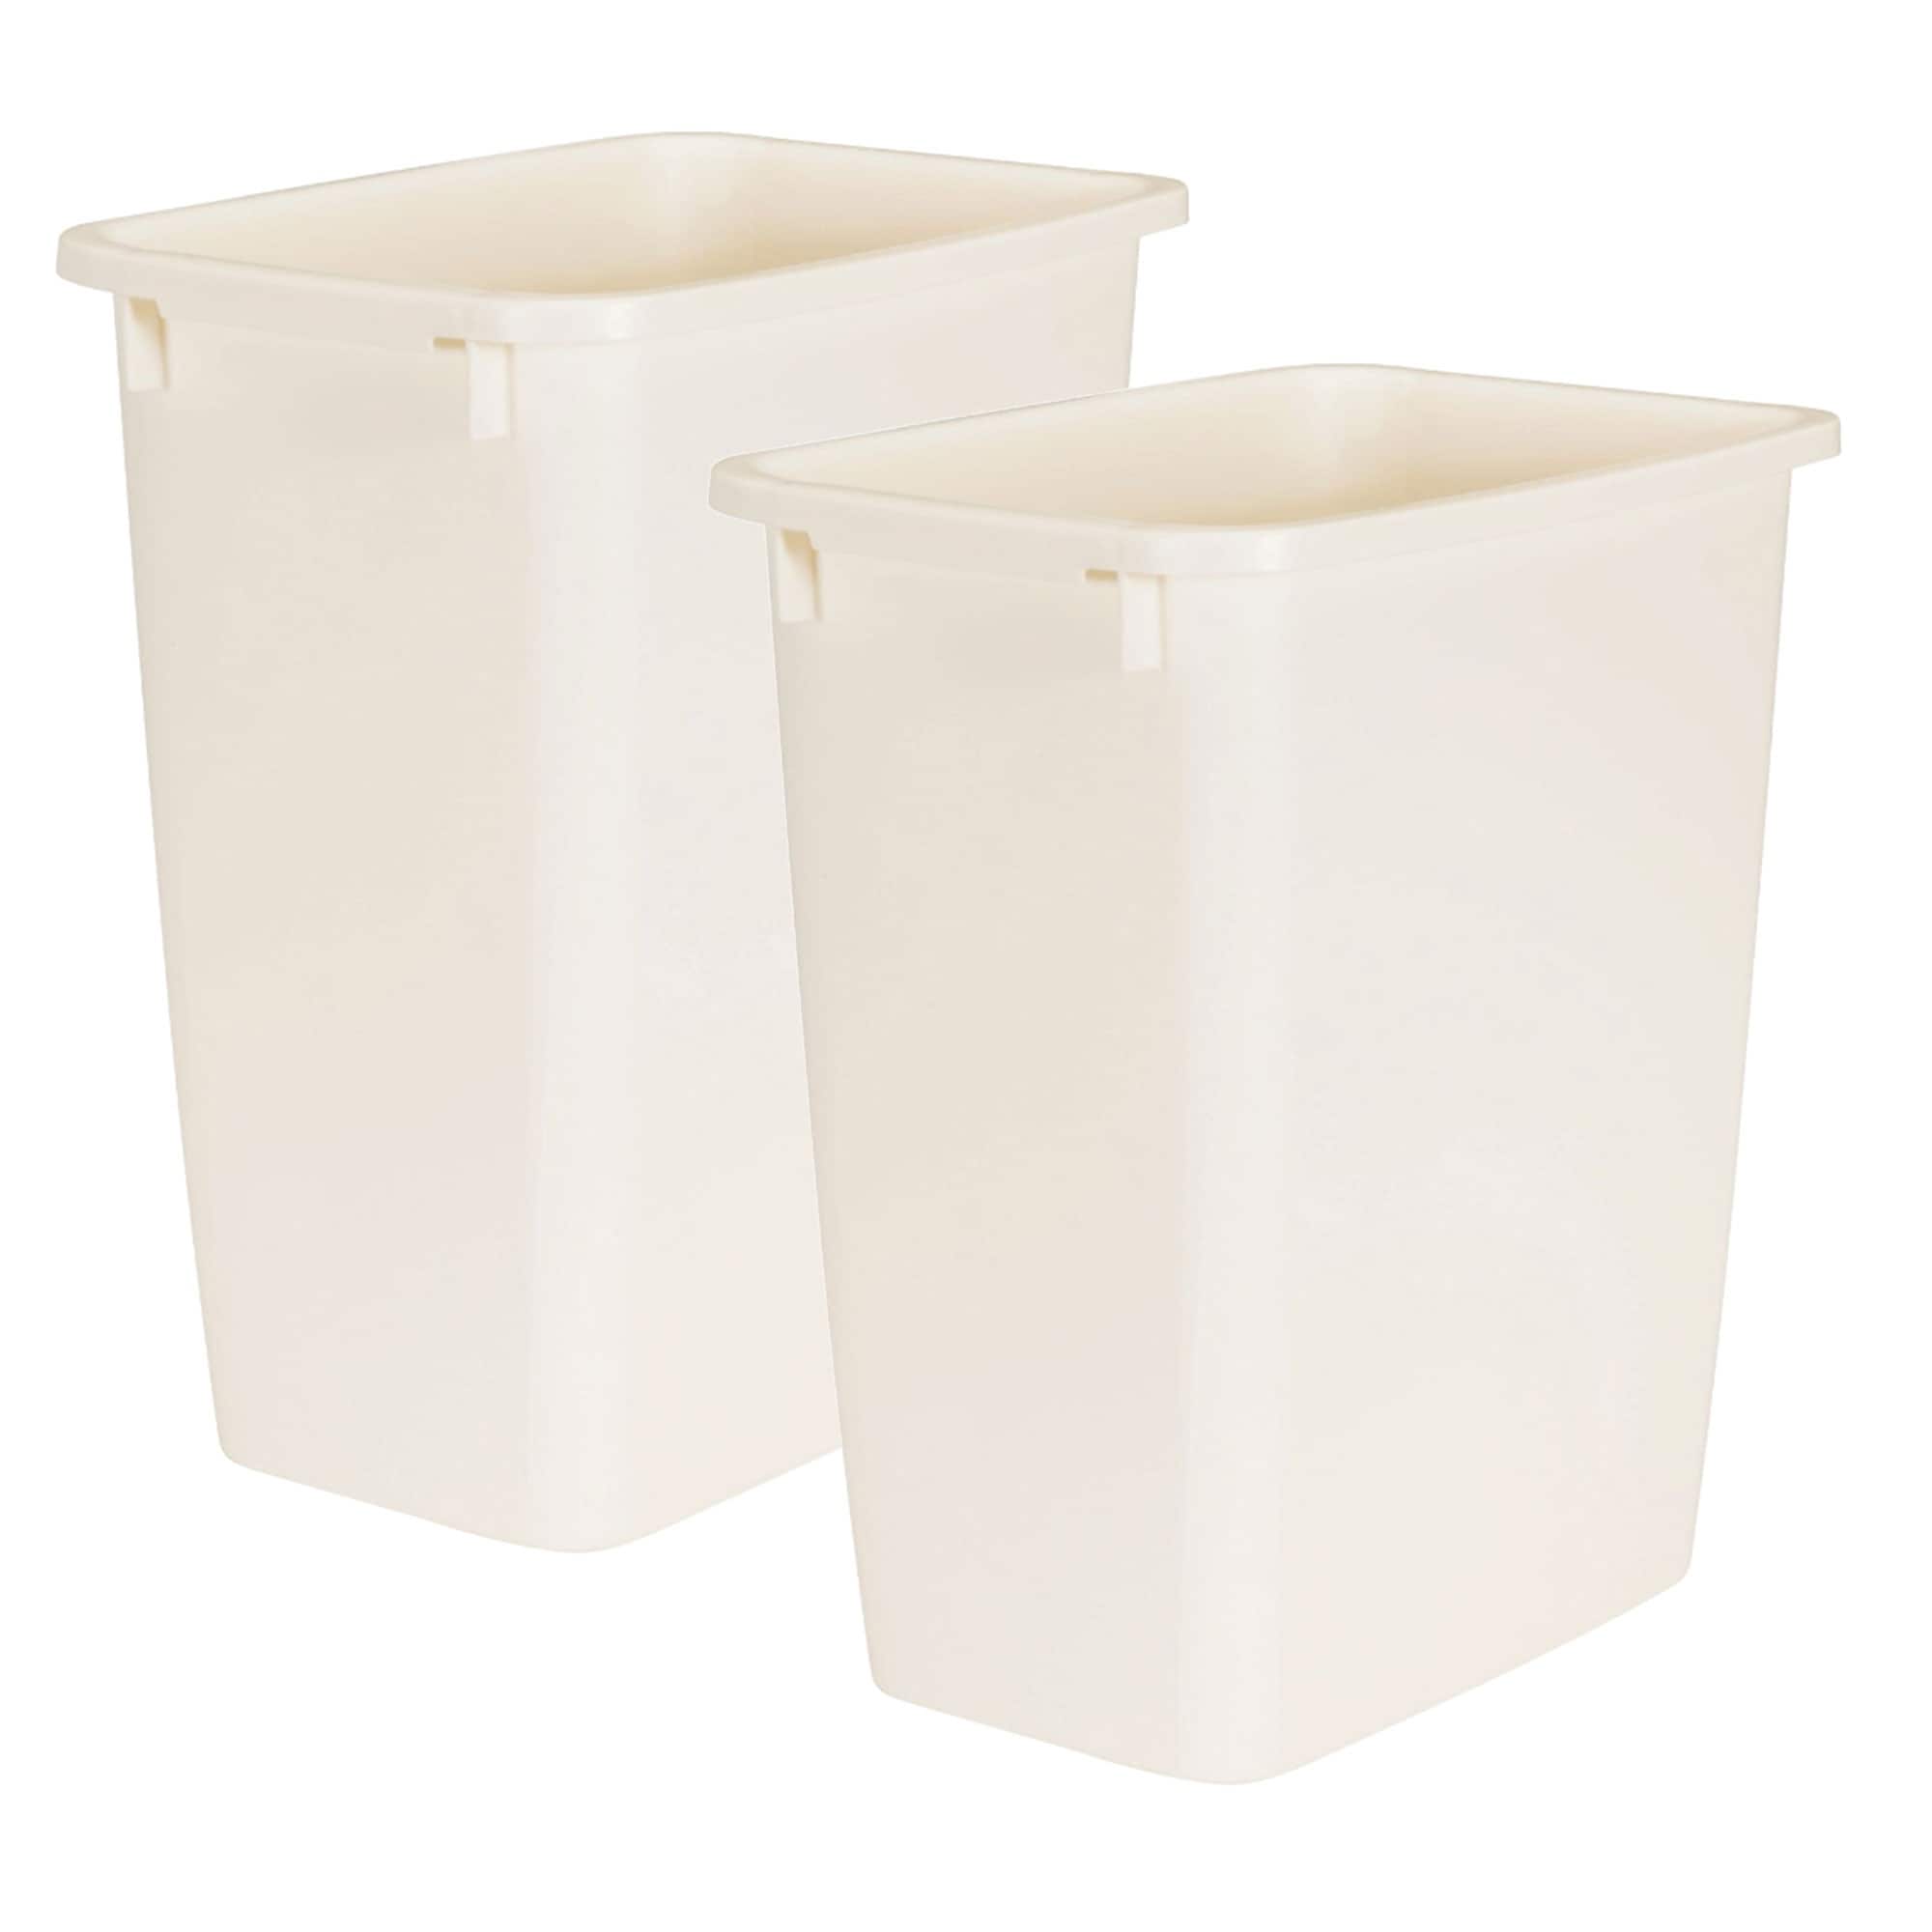  Rubbermaid 6 Quart 1.5 Gallon Traditionally Shaped Heavy Duty  Lightweight Bedroom, Bathroom, and Office Wastebasket Trash Can (2 Pack) :  Home & Kitchen